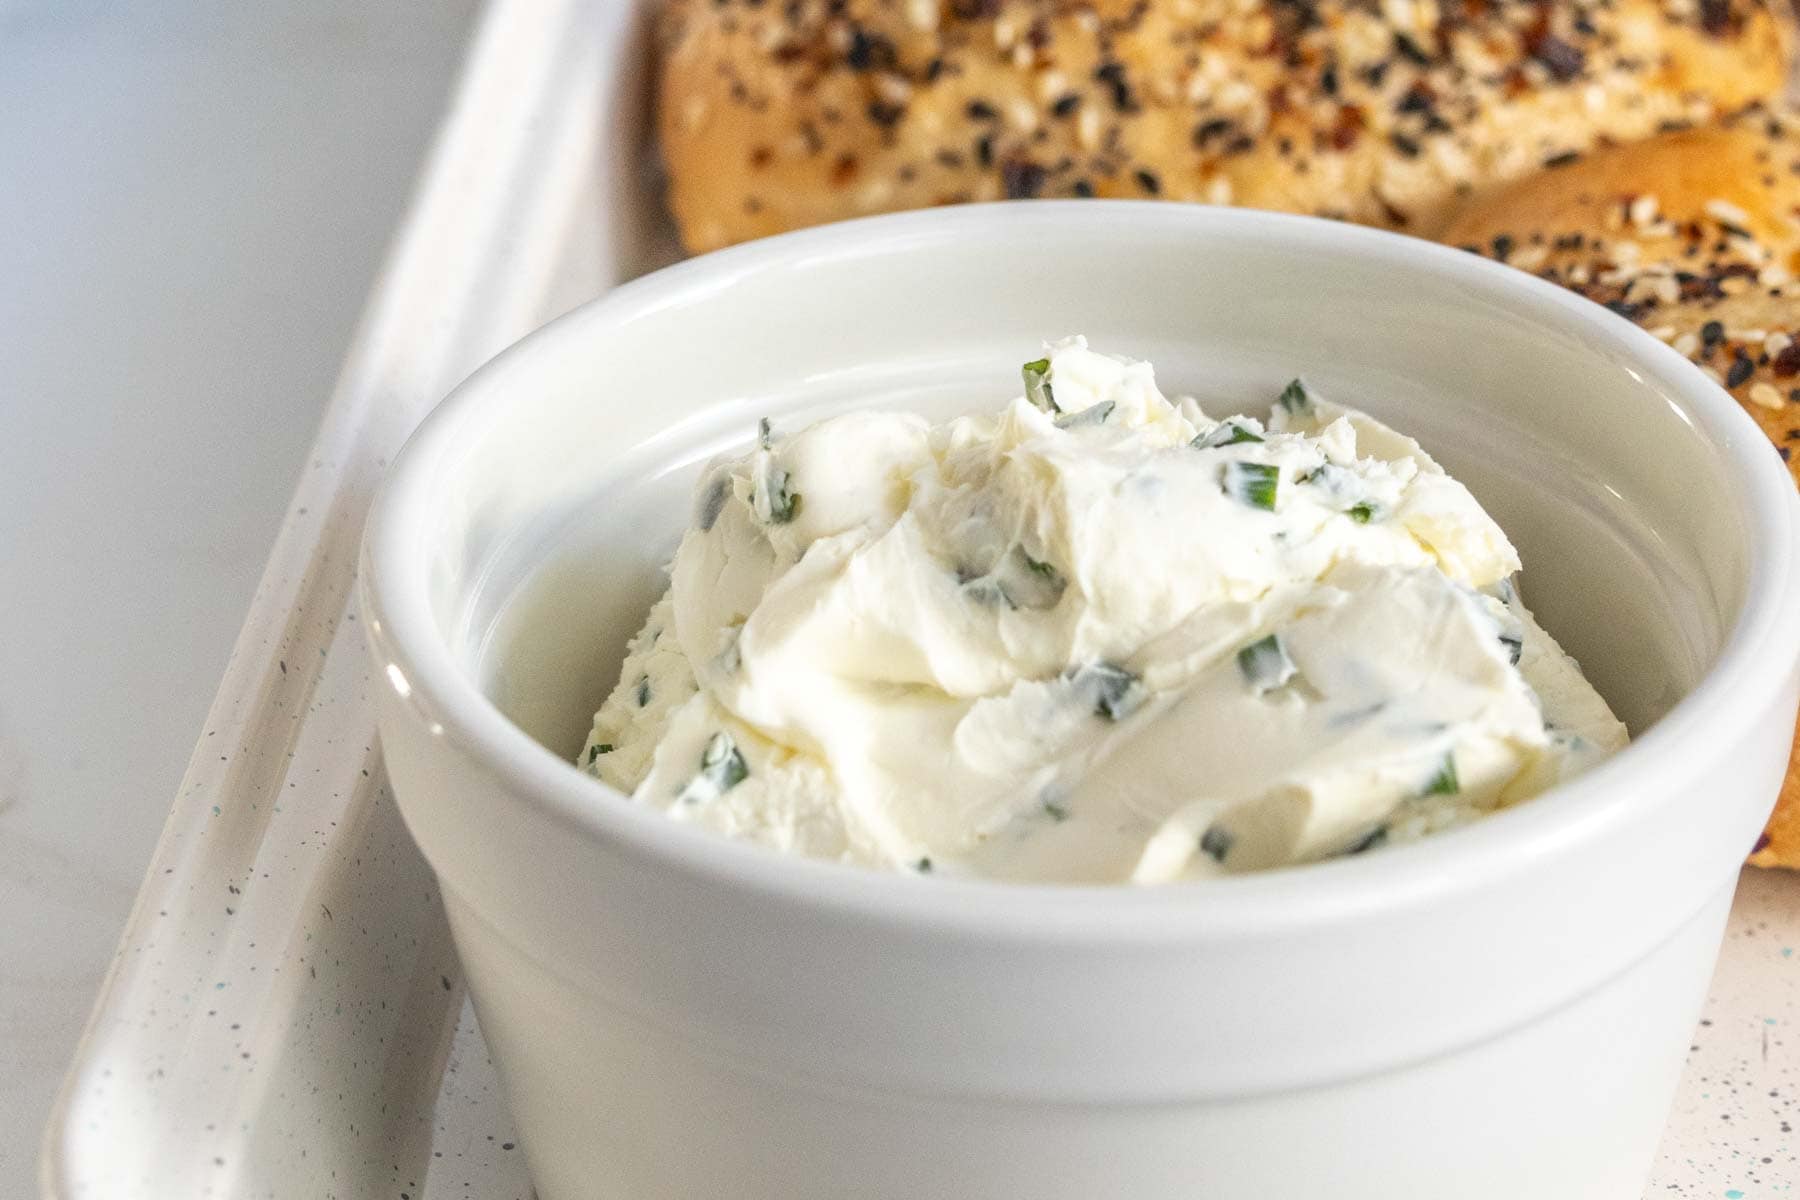 A white bowl of herb-infused cream cheese beside a bagel on a light-colored countertop.